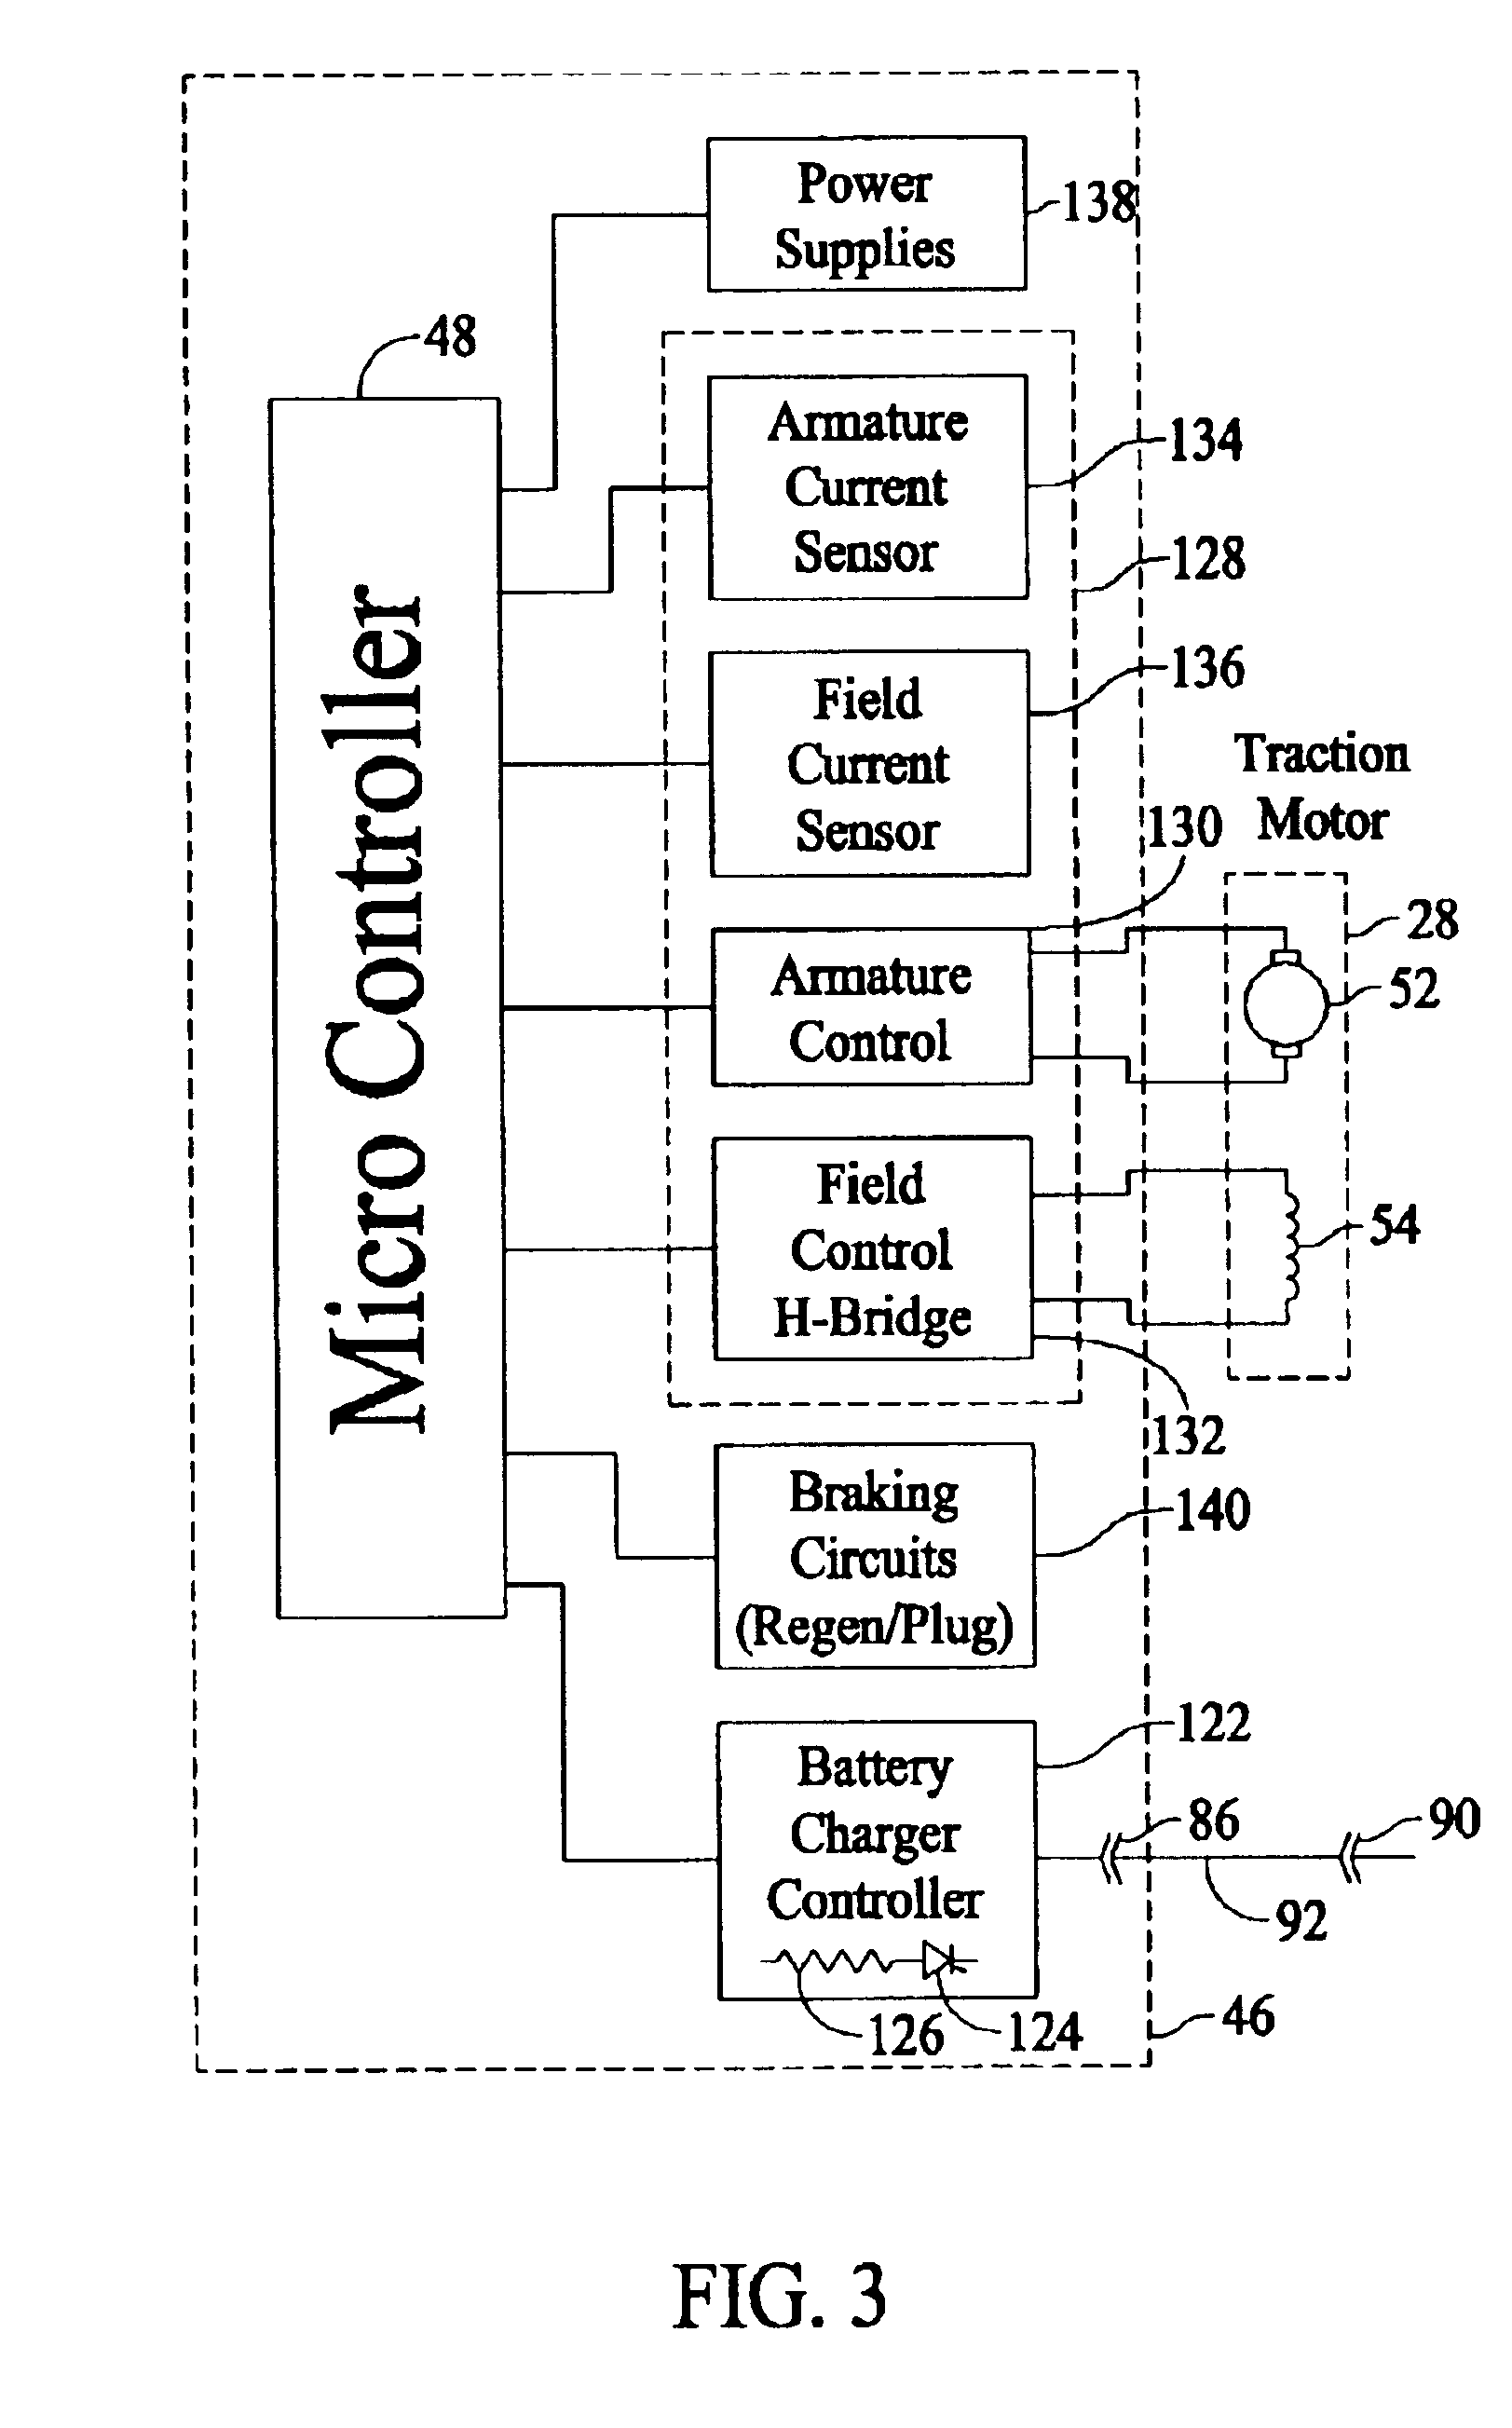 Methods and apparatus for controlling electric vehicle battery charger and motor using a single unitary controller